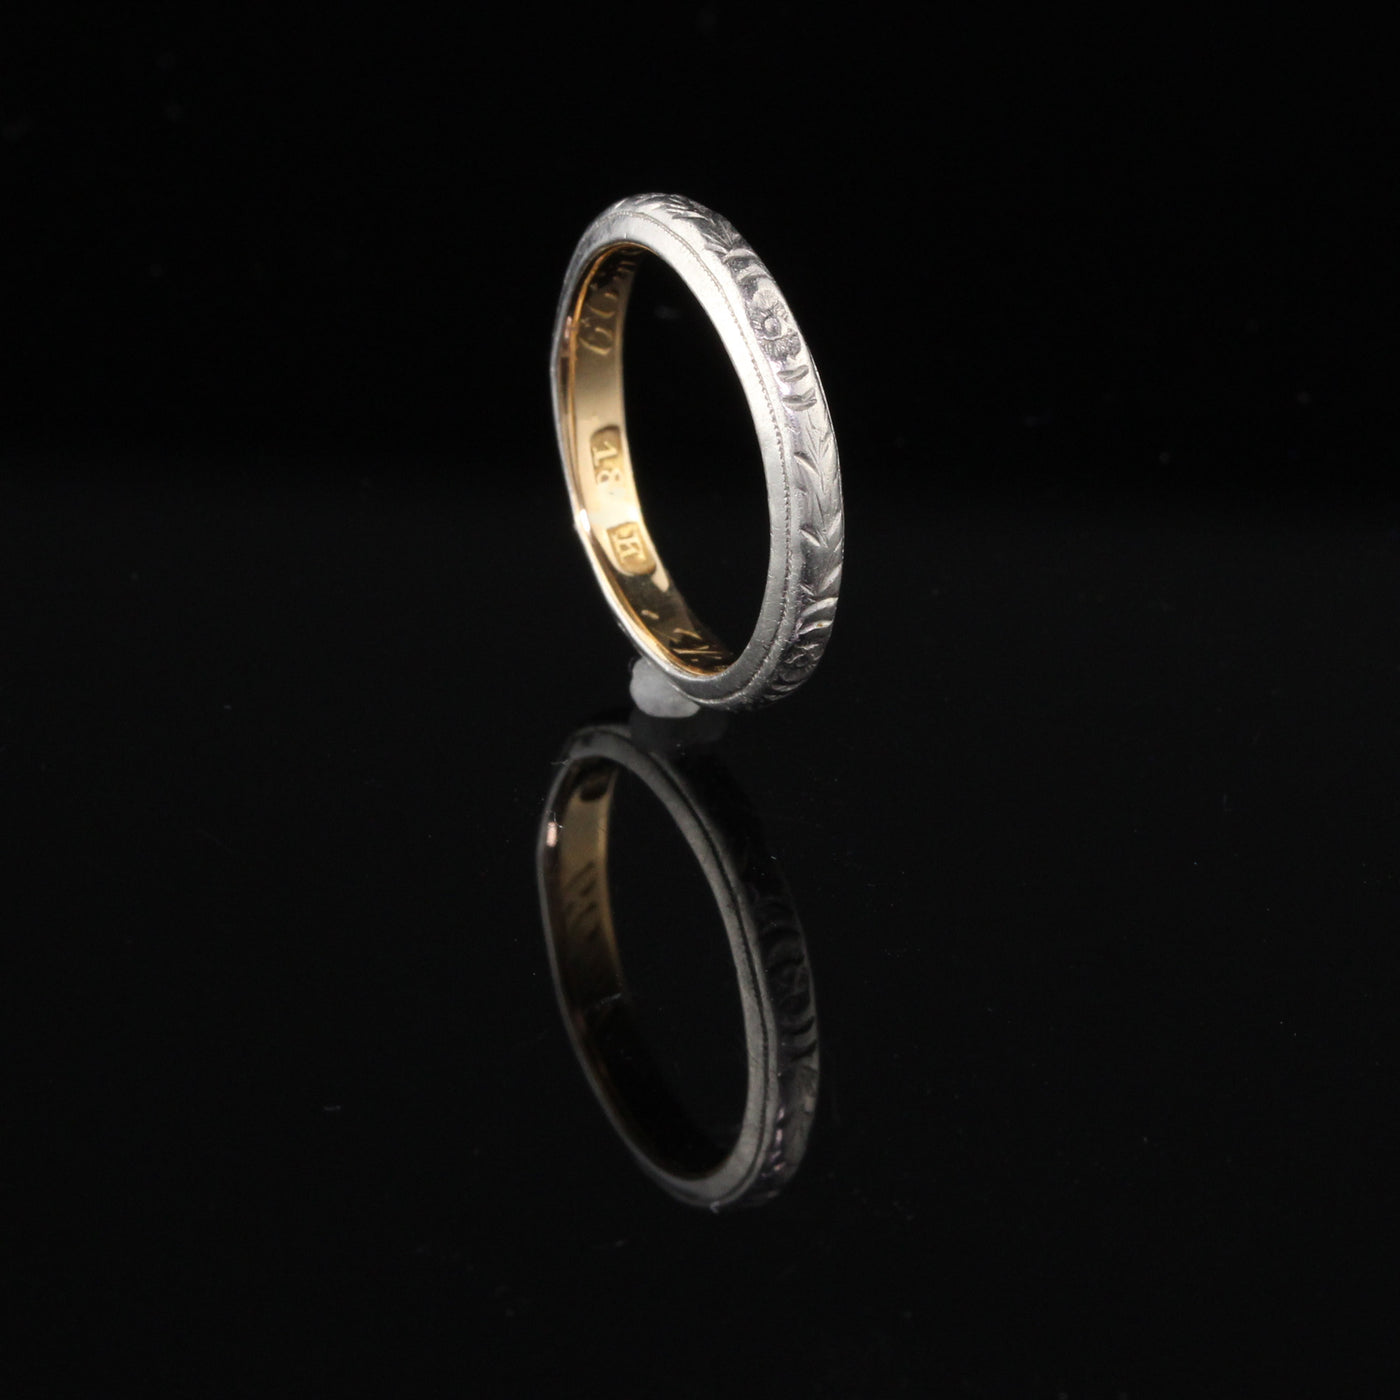 Antique Victorian Engraved Platinum And 18K Yellow Gold Wedding Band - Size 5 1/4